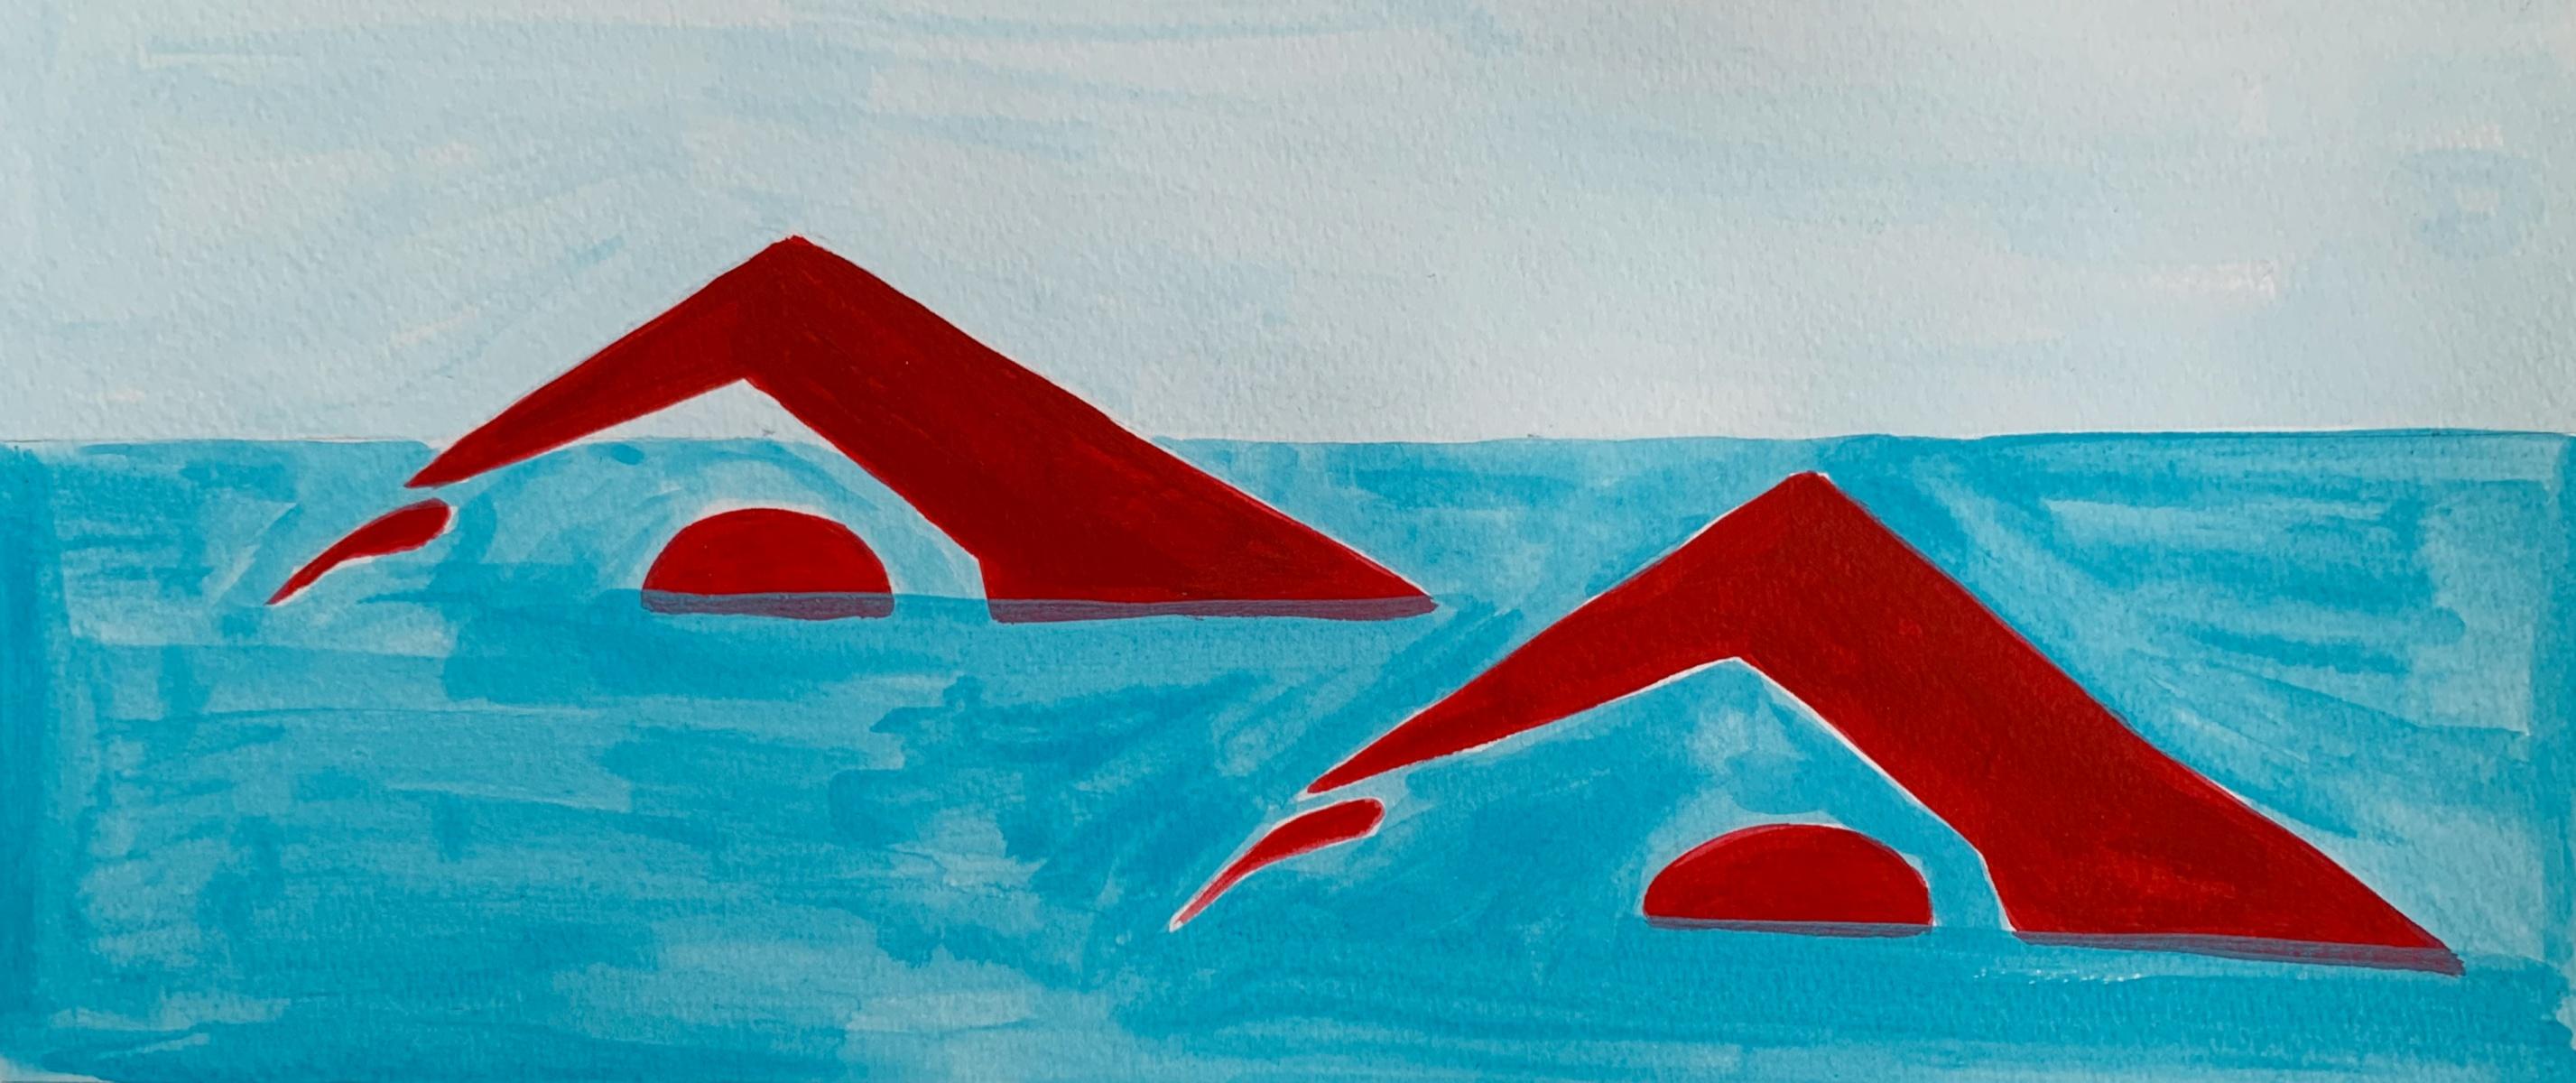 Figurative acrylic on paper painting by young professional European artist Waleria Matelska. Artwork is minimalist and composed with synthesized shapes. Painting is vibrant- main colors are red and blue. There are two figures swimming.

WALERIA